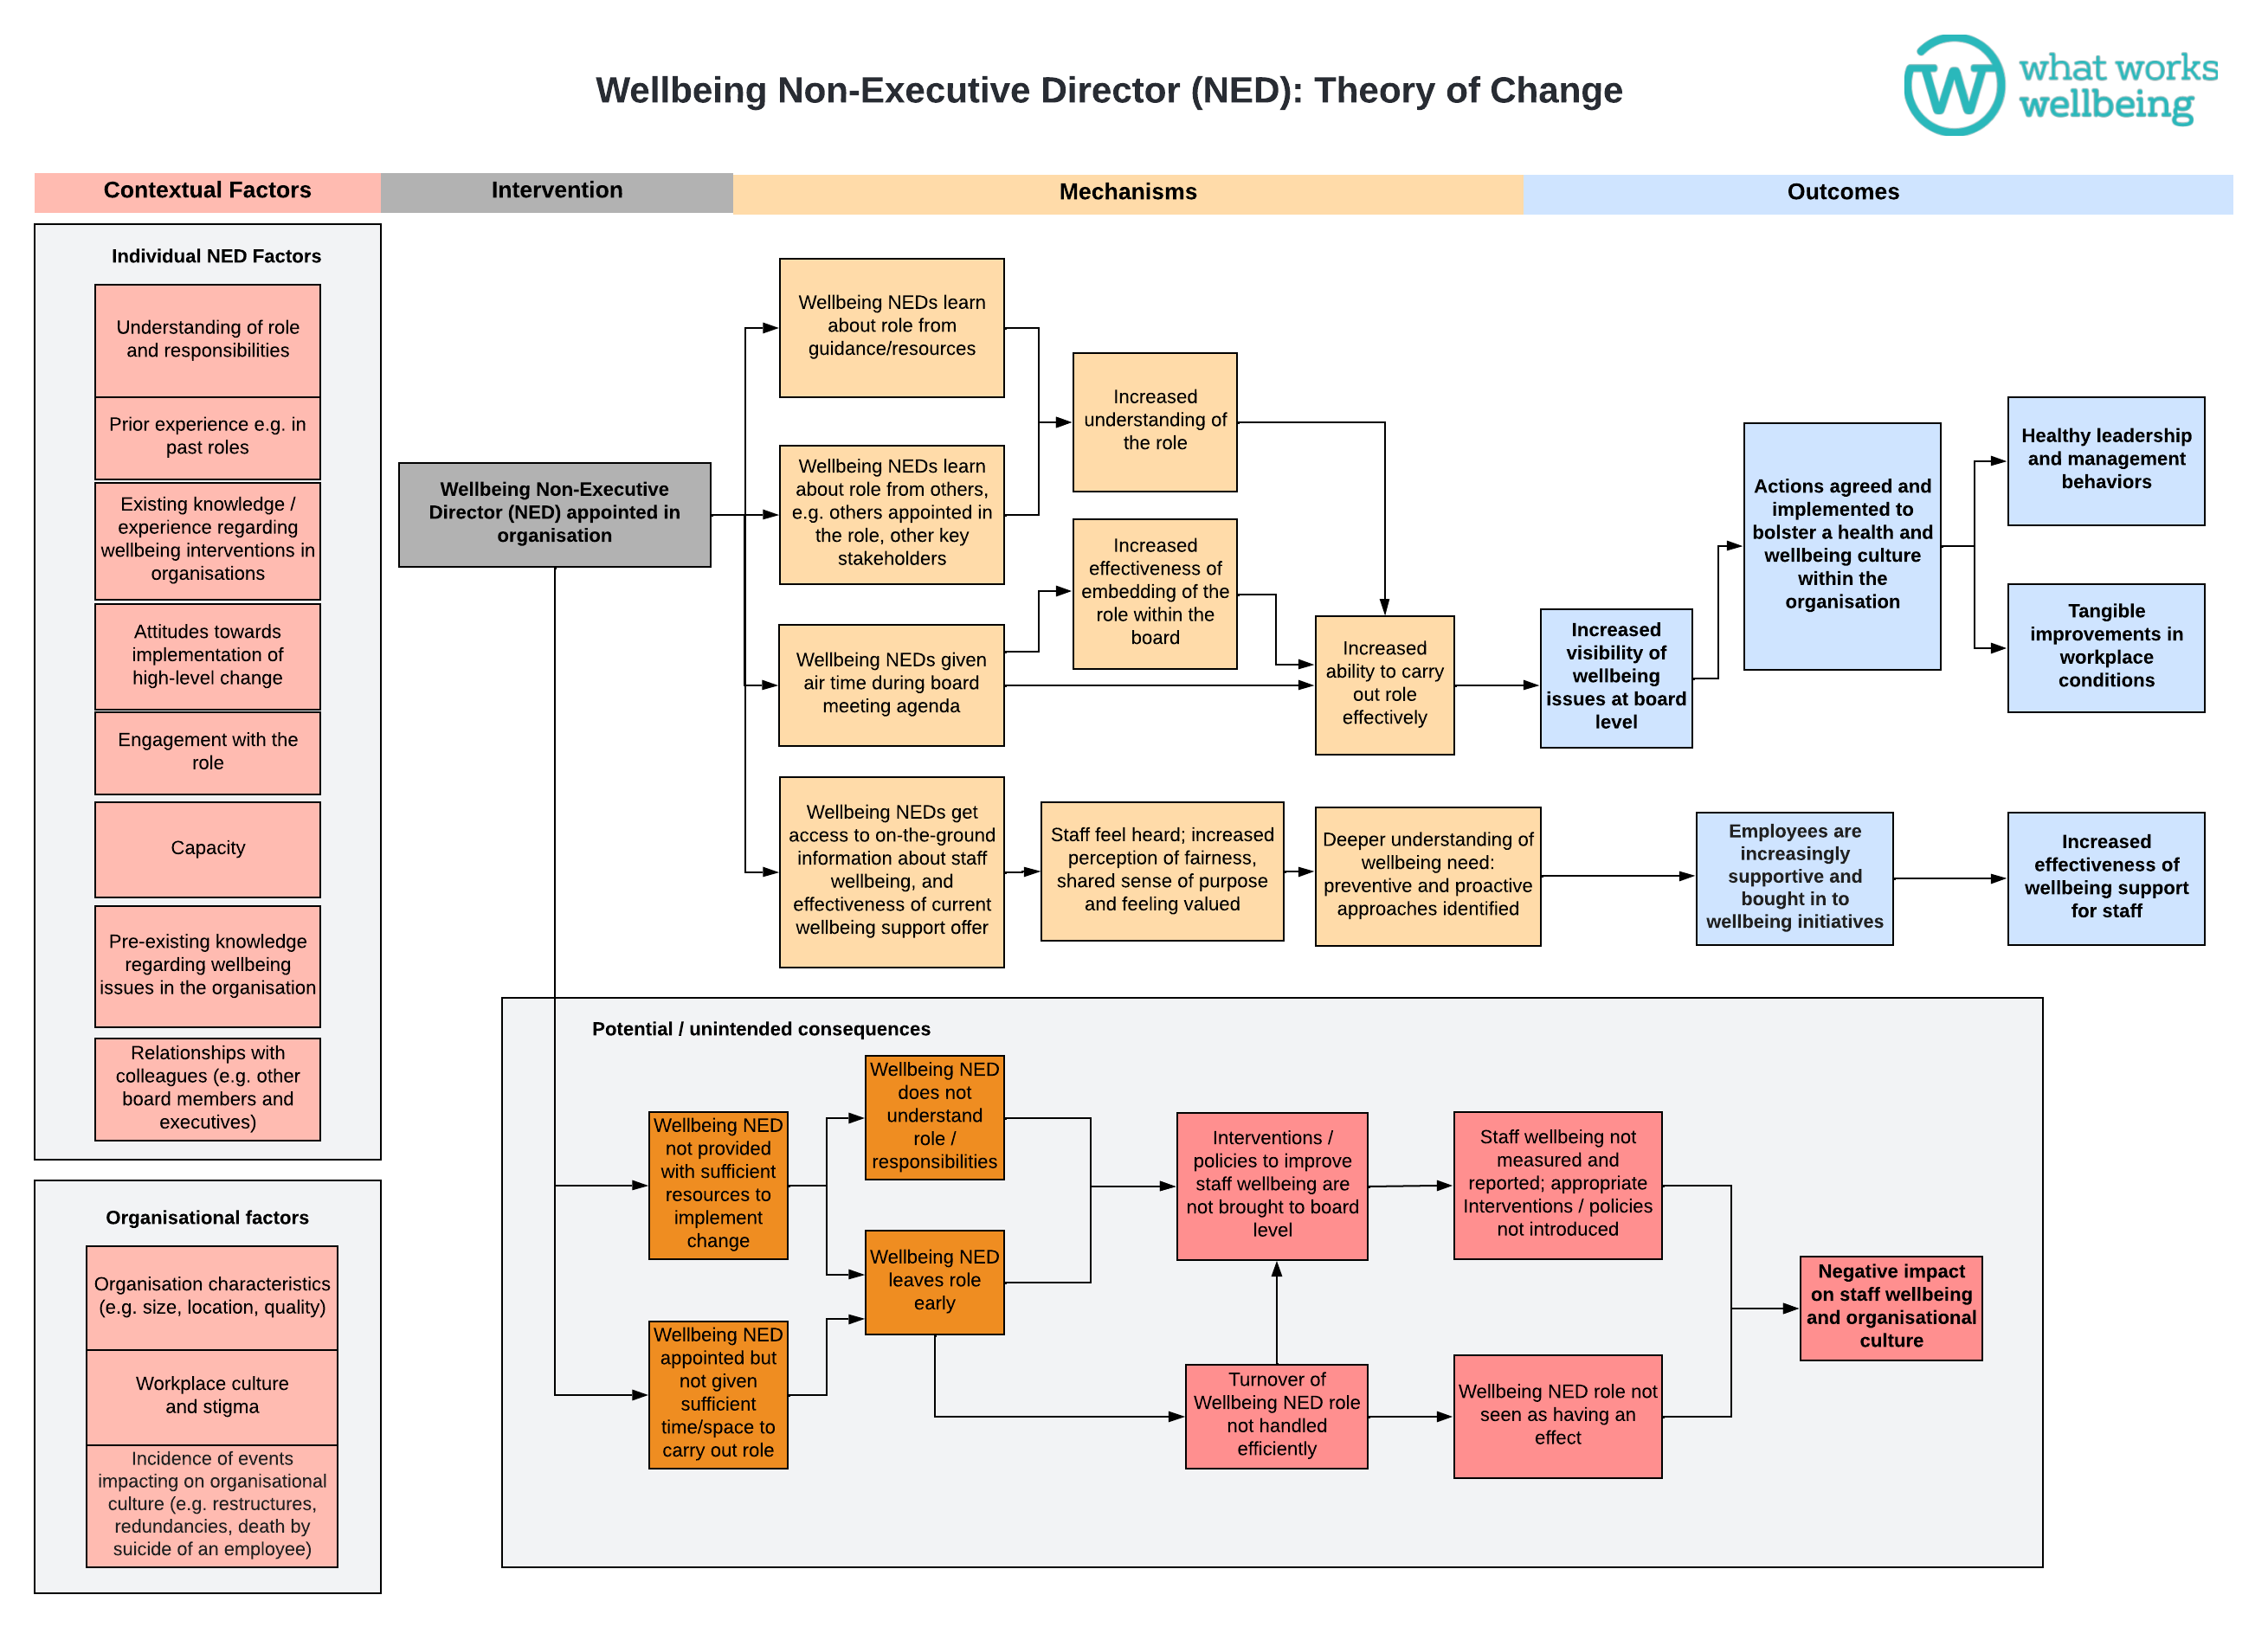 Wellbeing Non-Executive Director Theory of Change